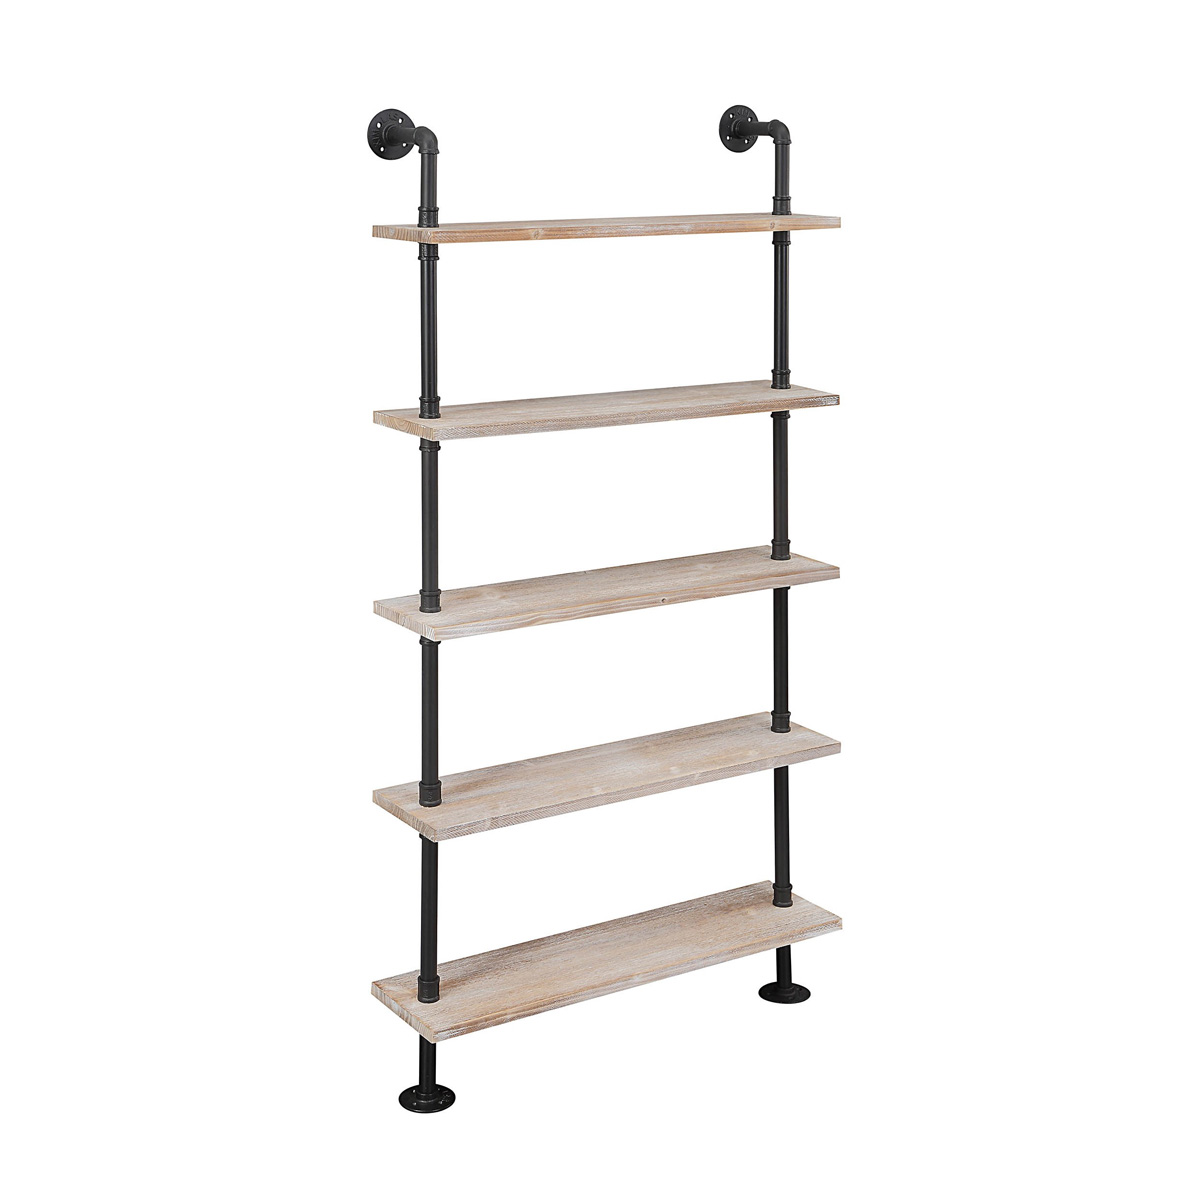 4D Concepts Claremont 5-Tier Industrial Piping Shelf Unit